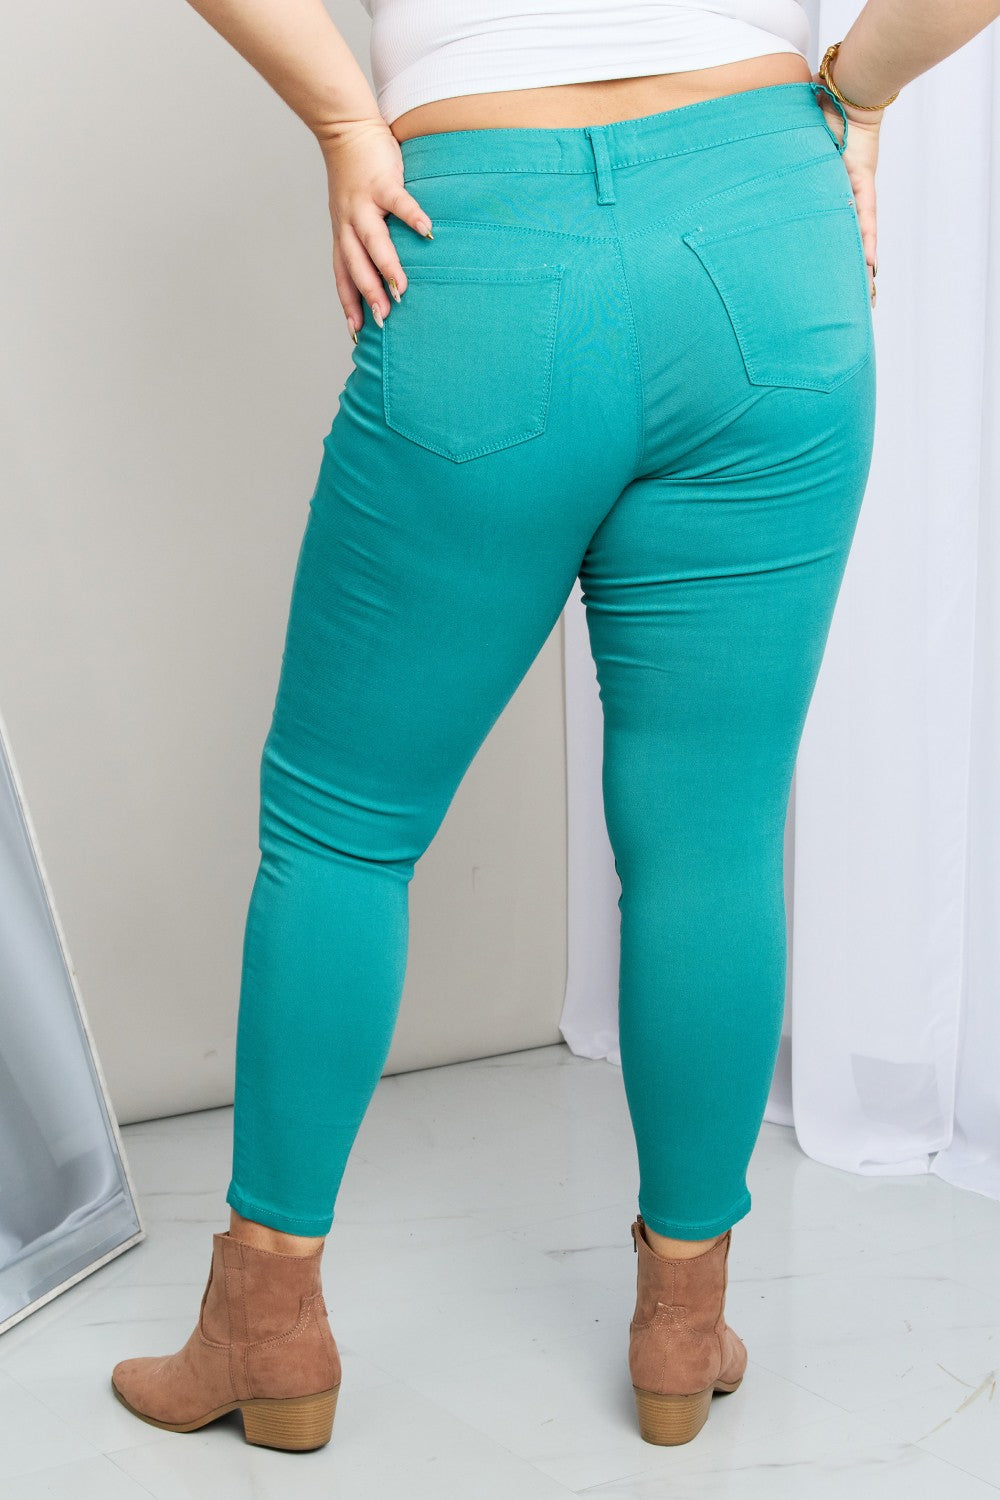 Back View, Plus Size, YMI Jeanswear, Kate Hyper-Stretch Full Size Mid-Rise Skinny Jeans in Sea Green